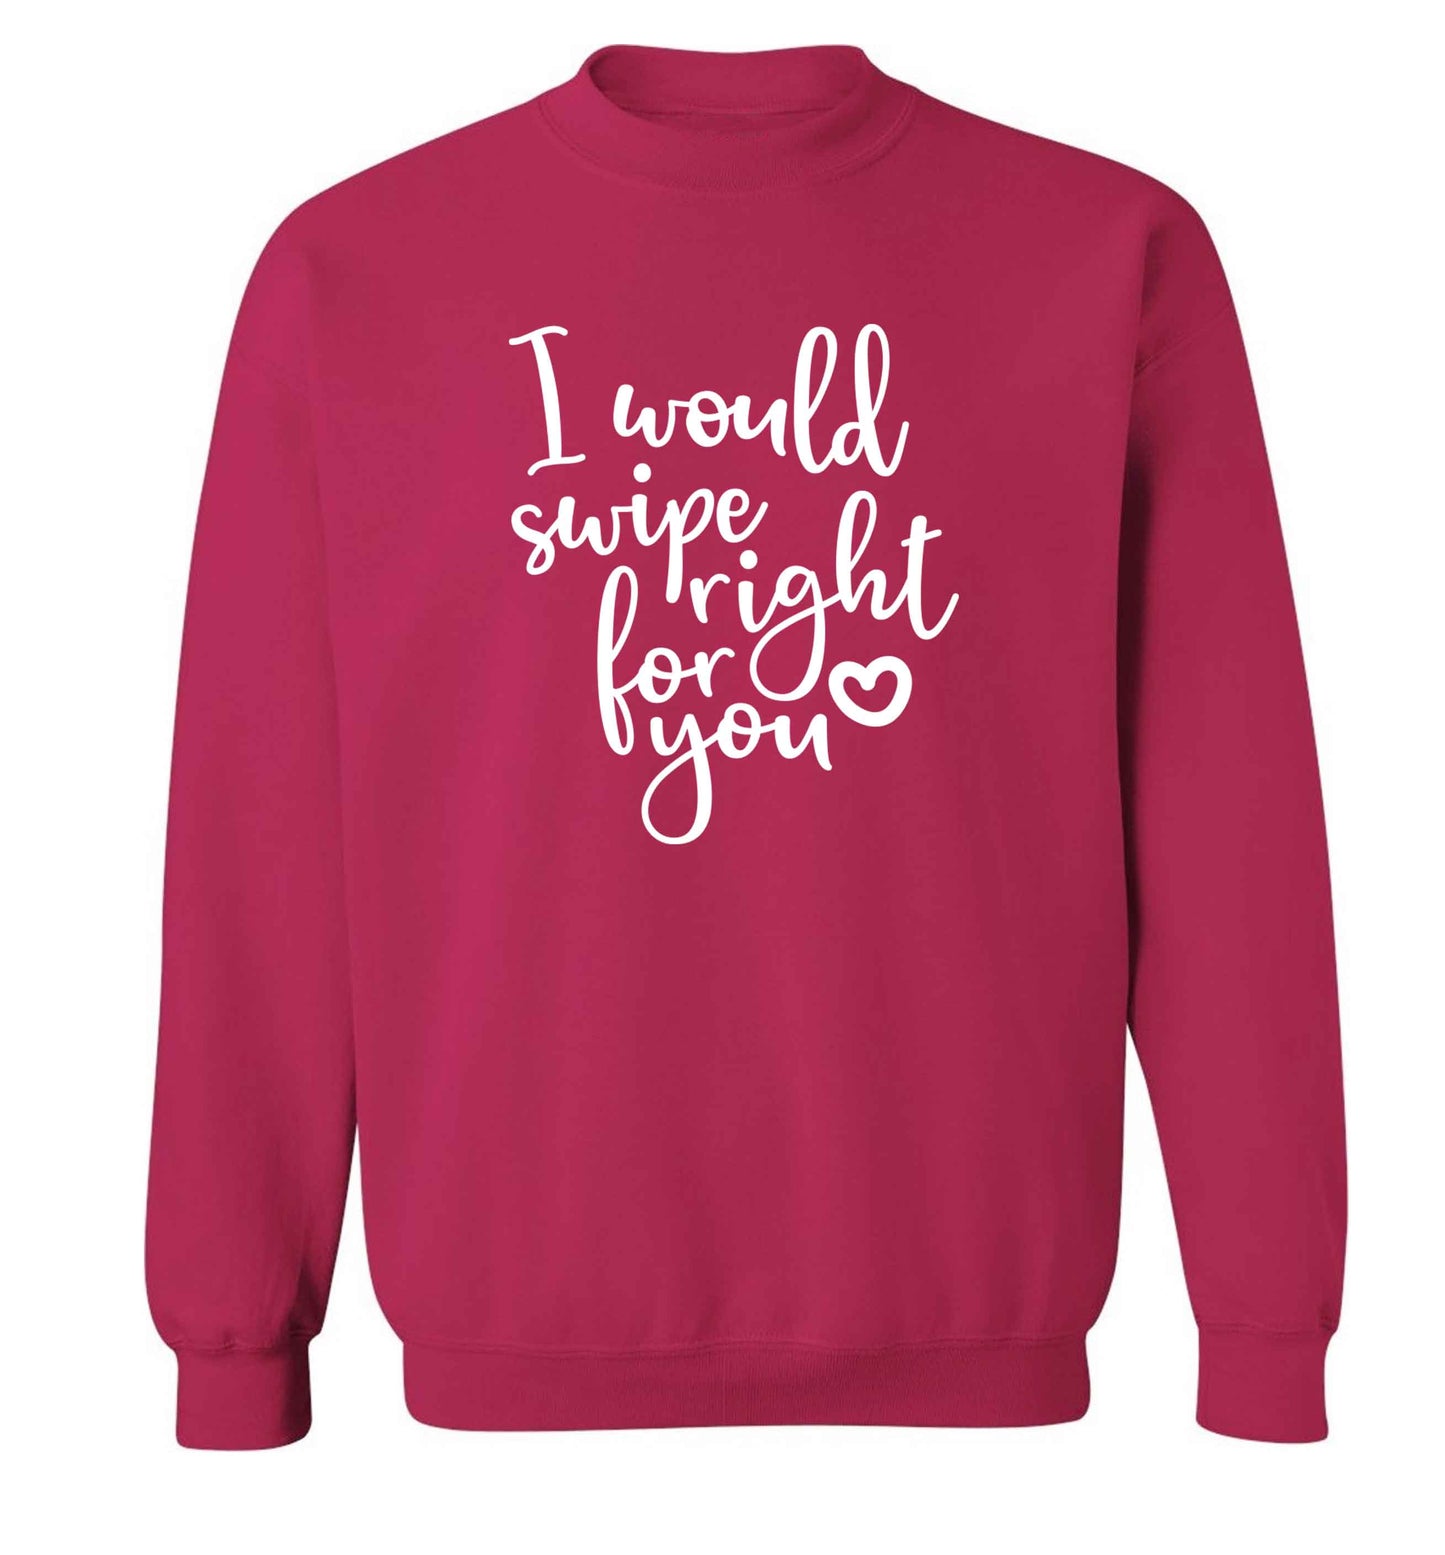 I would swipe right for you adult's unisex pink sweater 2XL